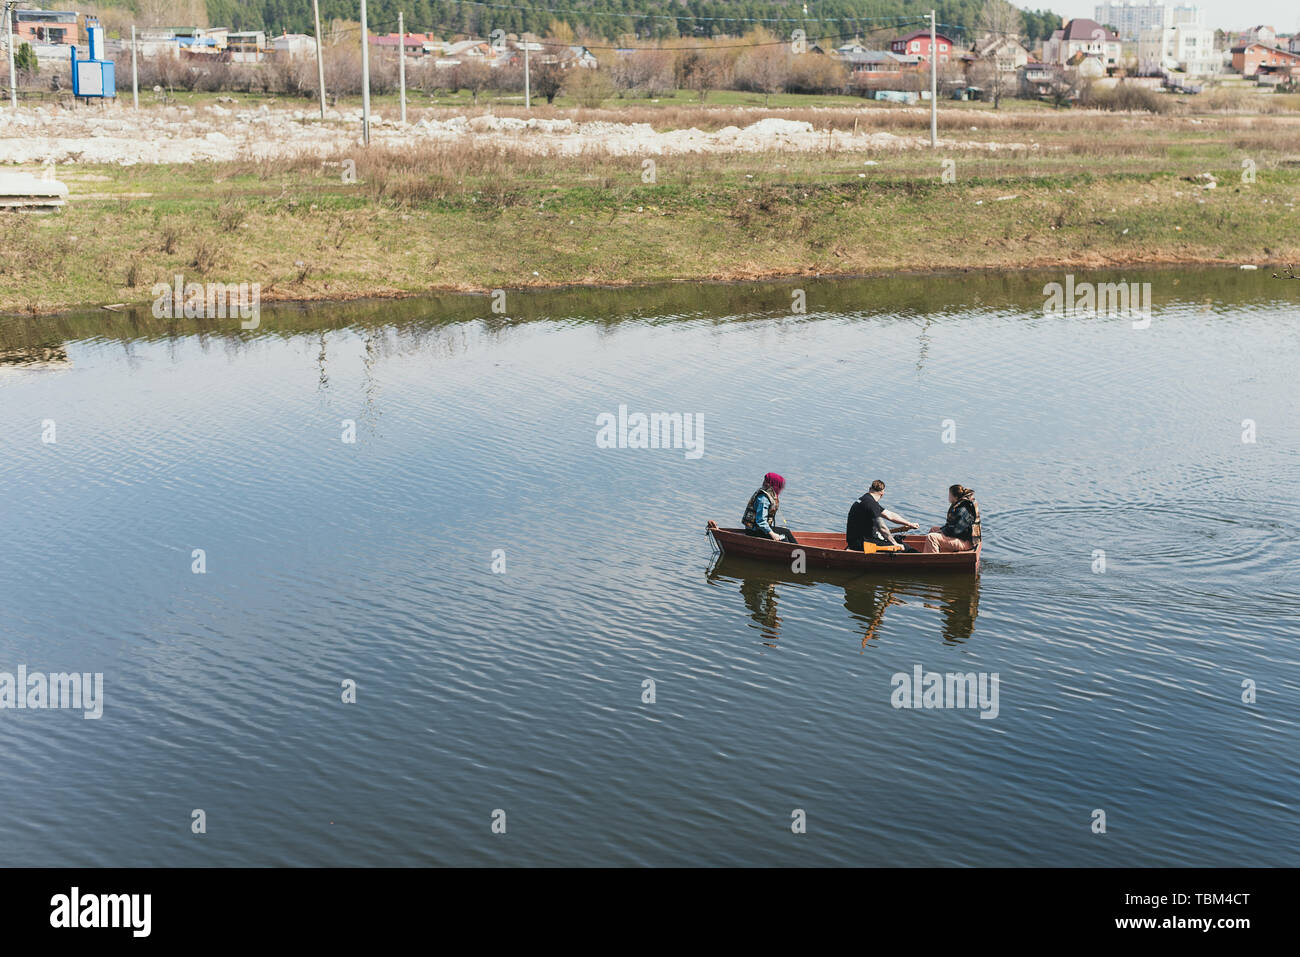 Three friends in a boat are crossing the river. River rafting. Stock Photo